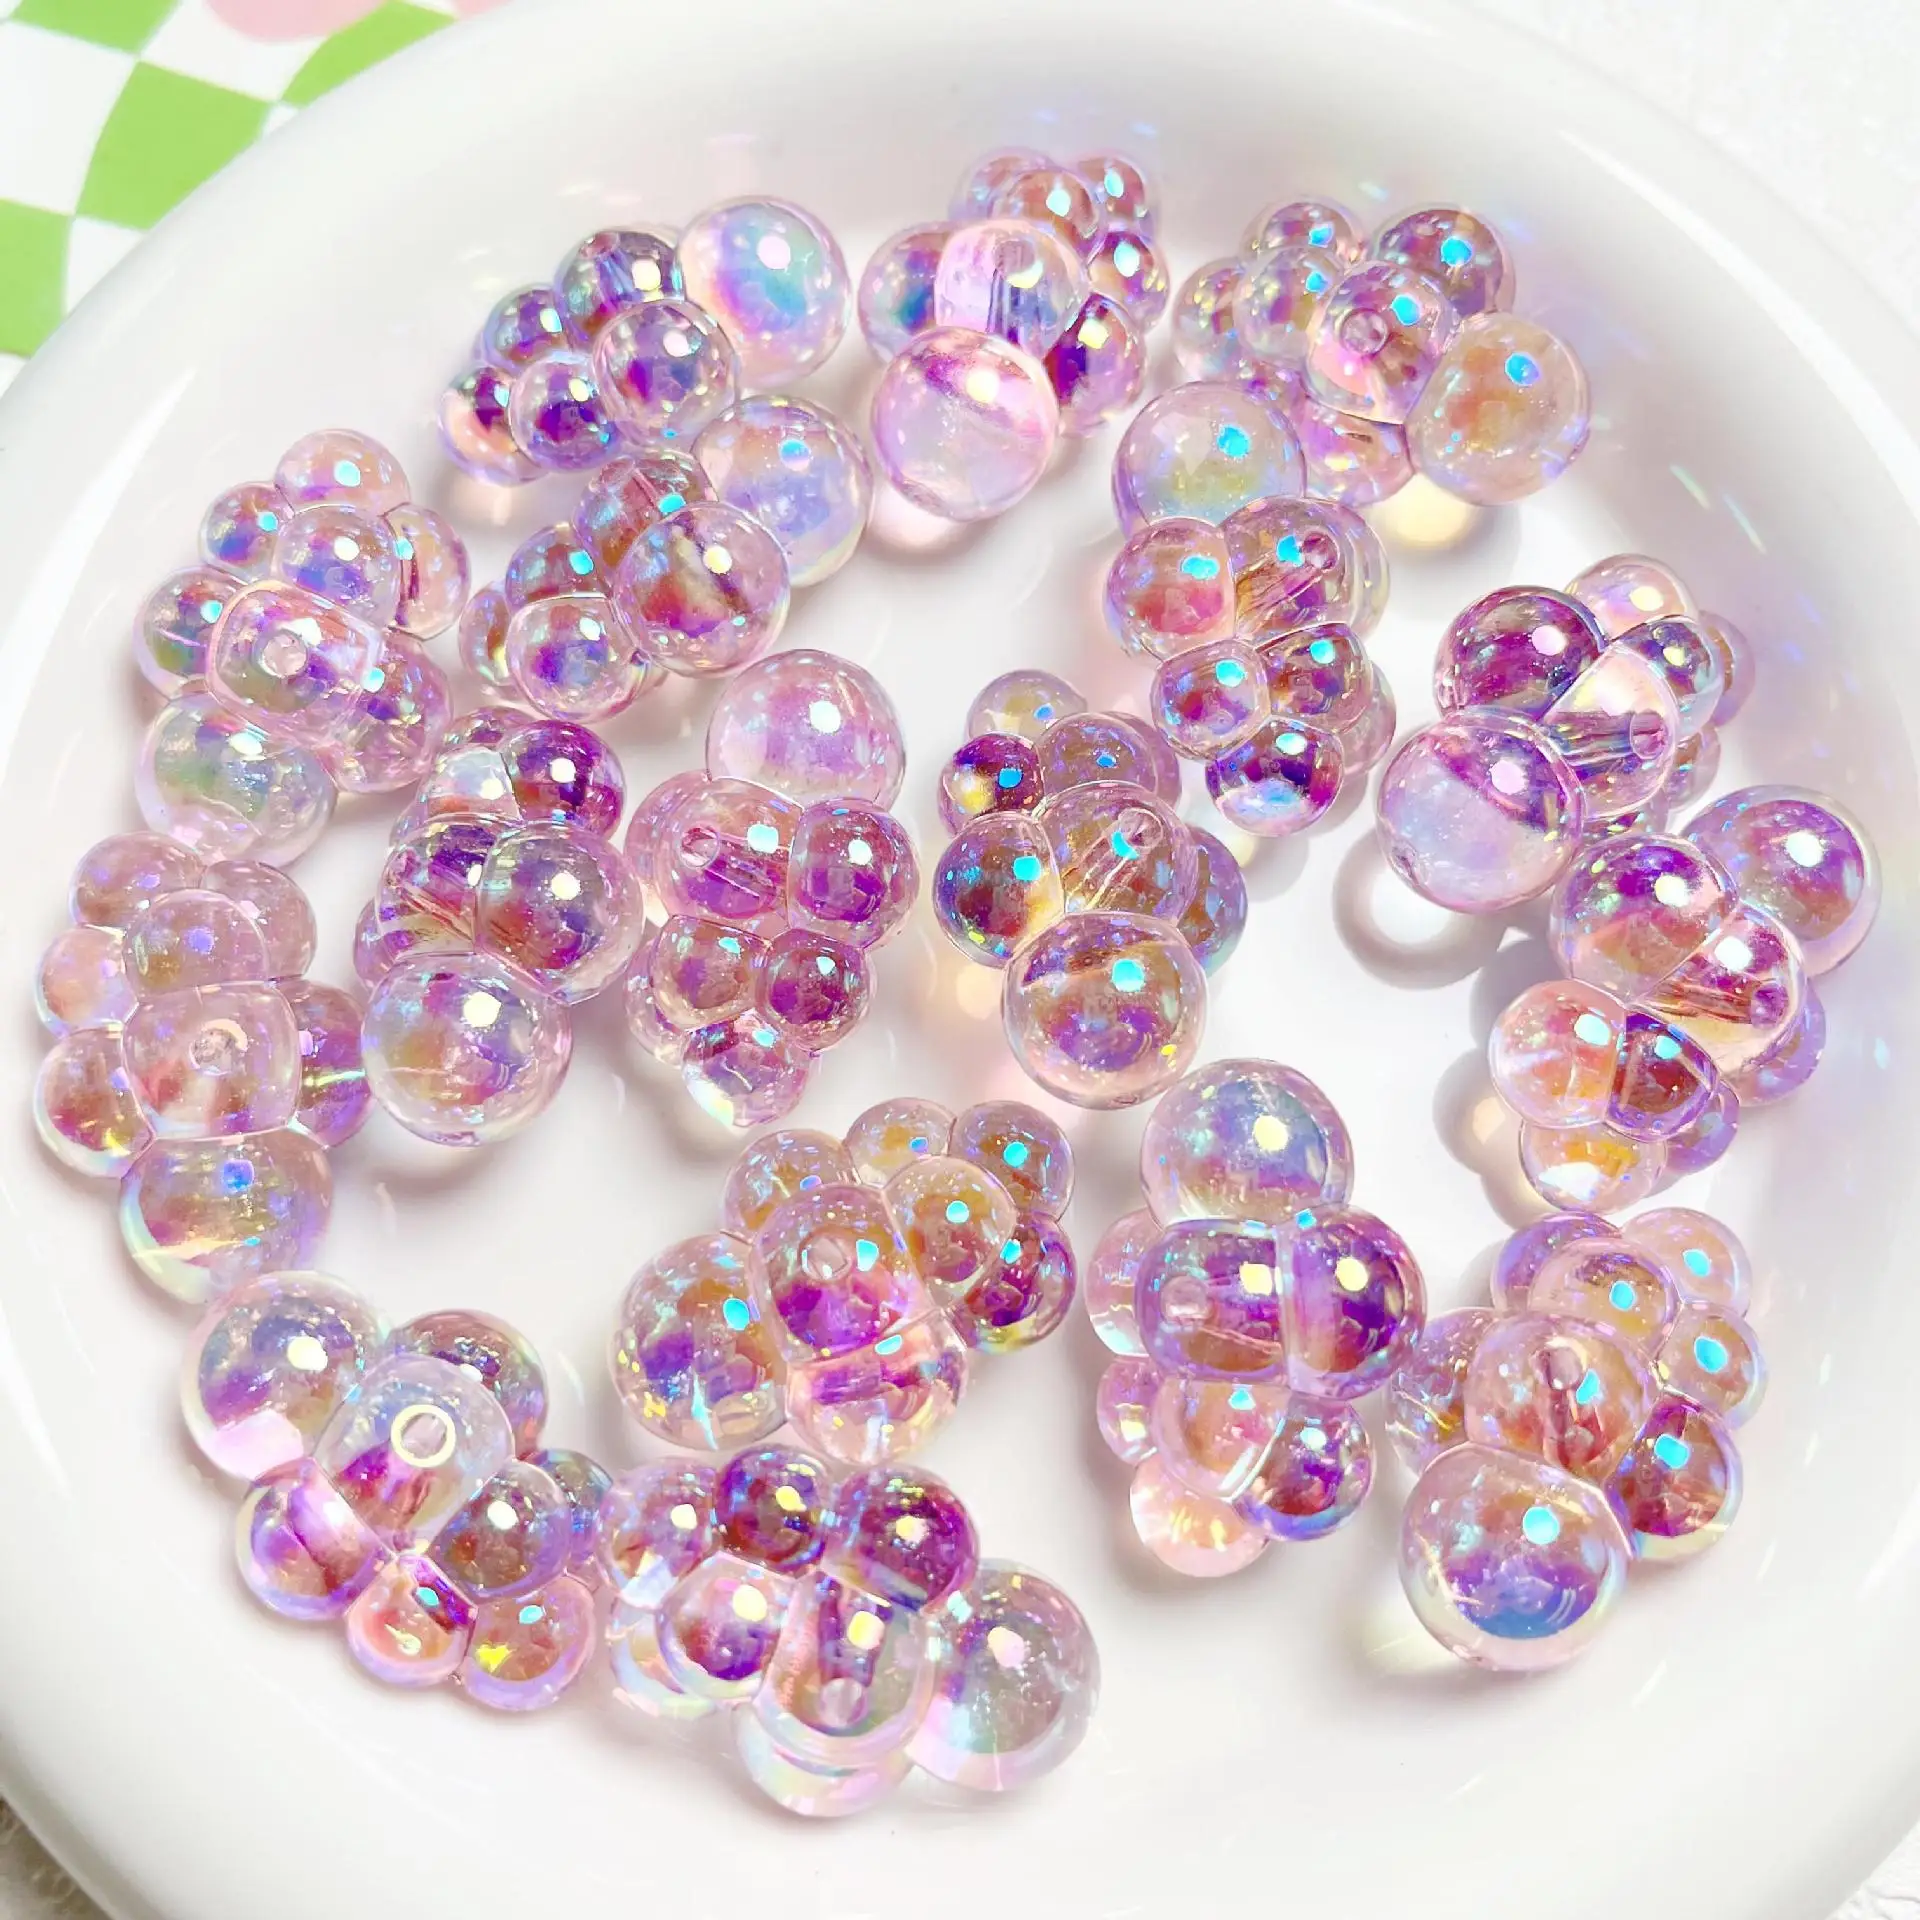 20g 2-45mm Colorful Acrylic Pearlescent Mixed Beads ABS Lmitation Charm  Loose Beads Counter Jewelry Findings Making wholesale - AliExpress